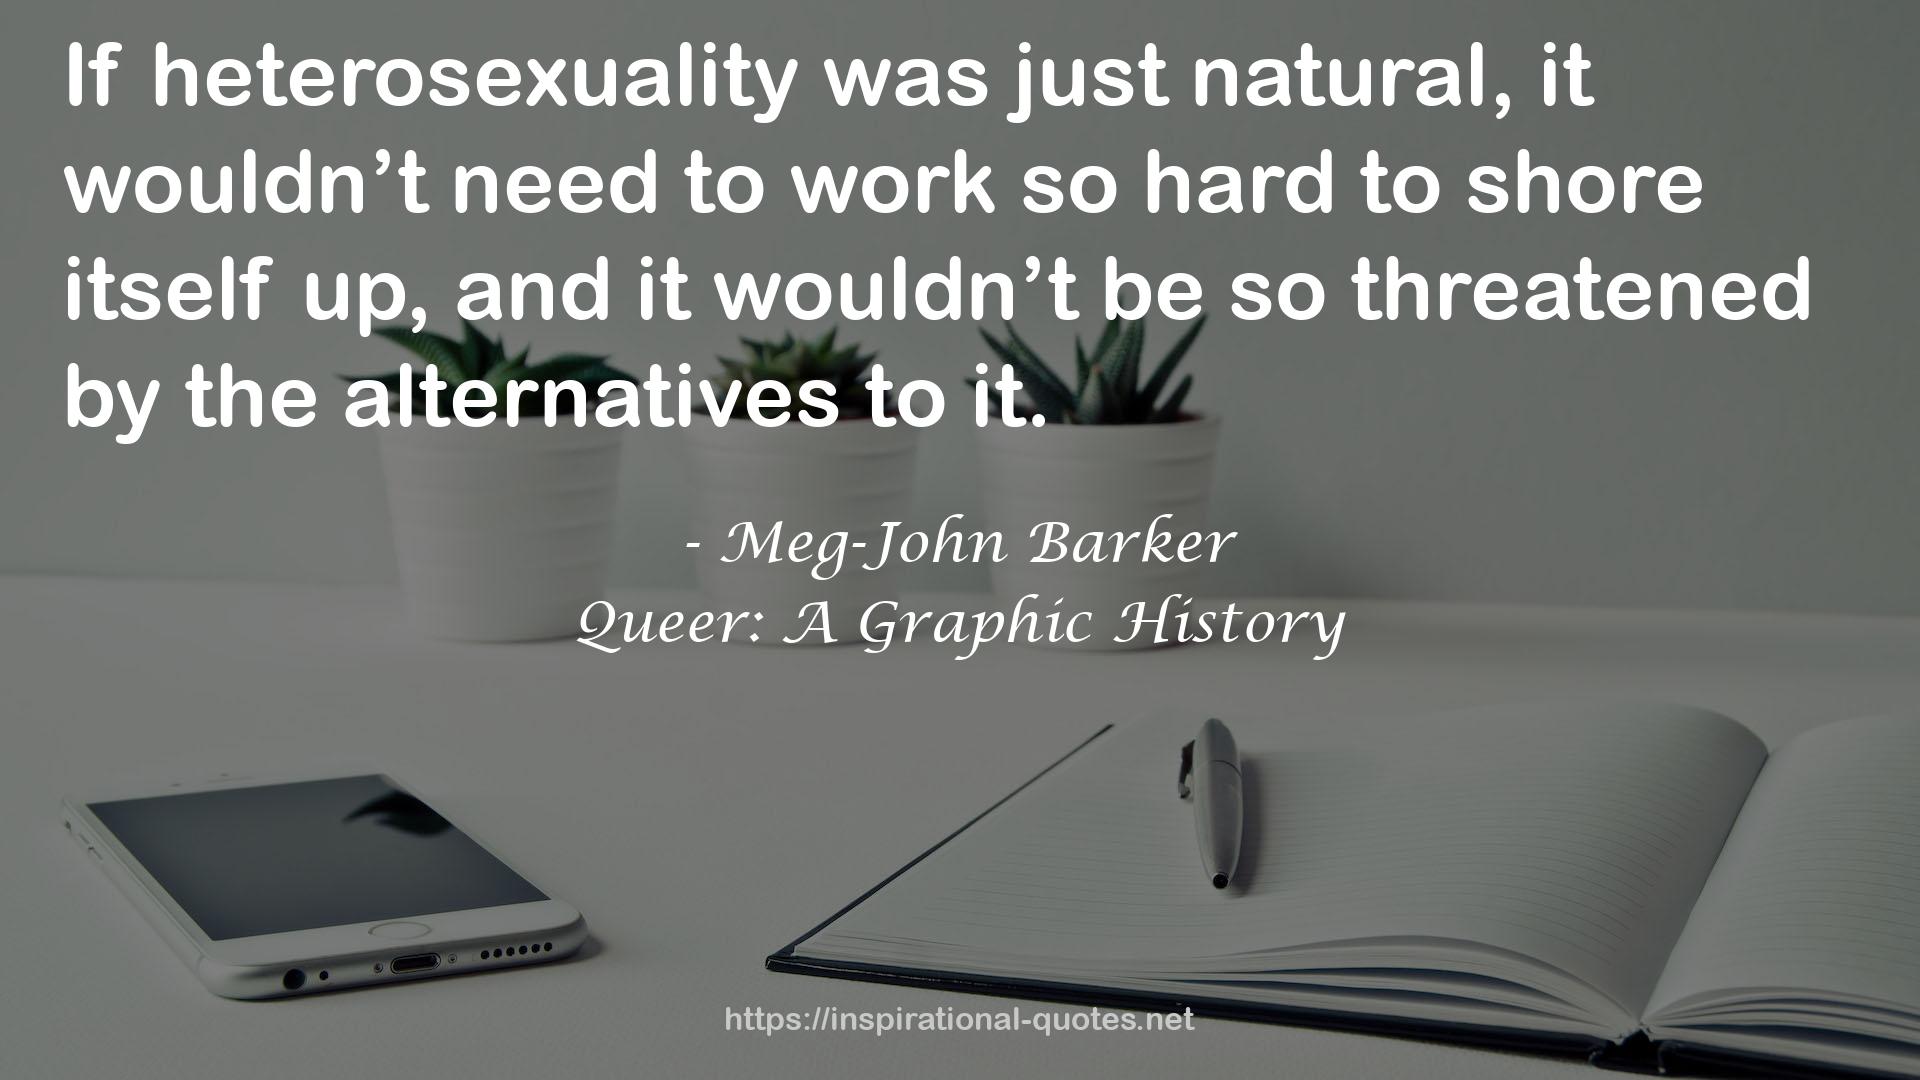 Queer: A Graphic History QUOTES